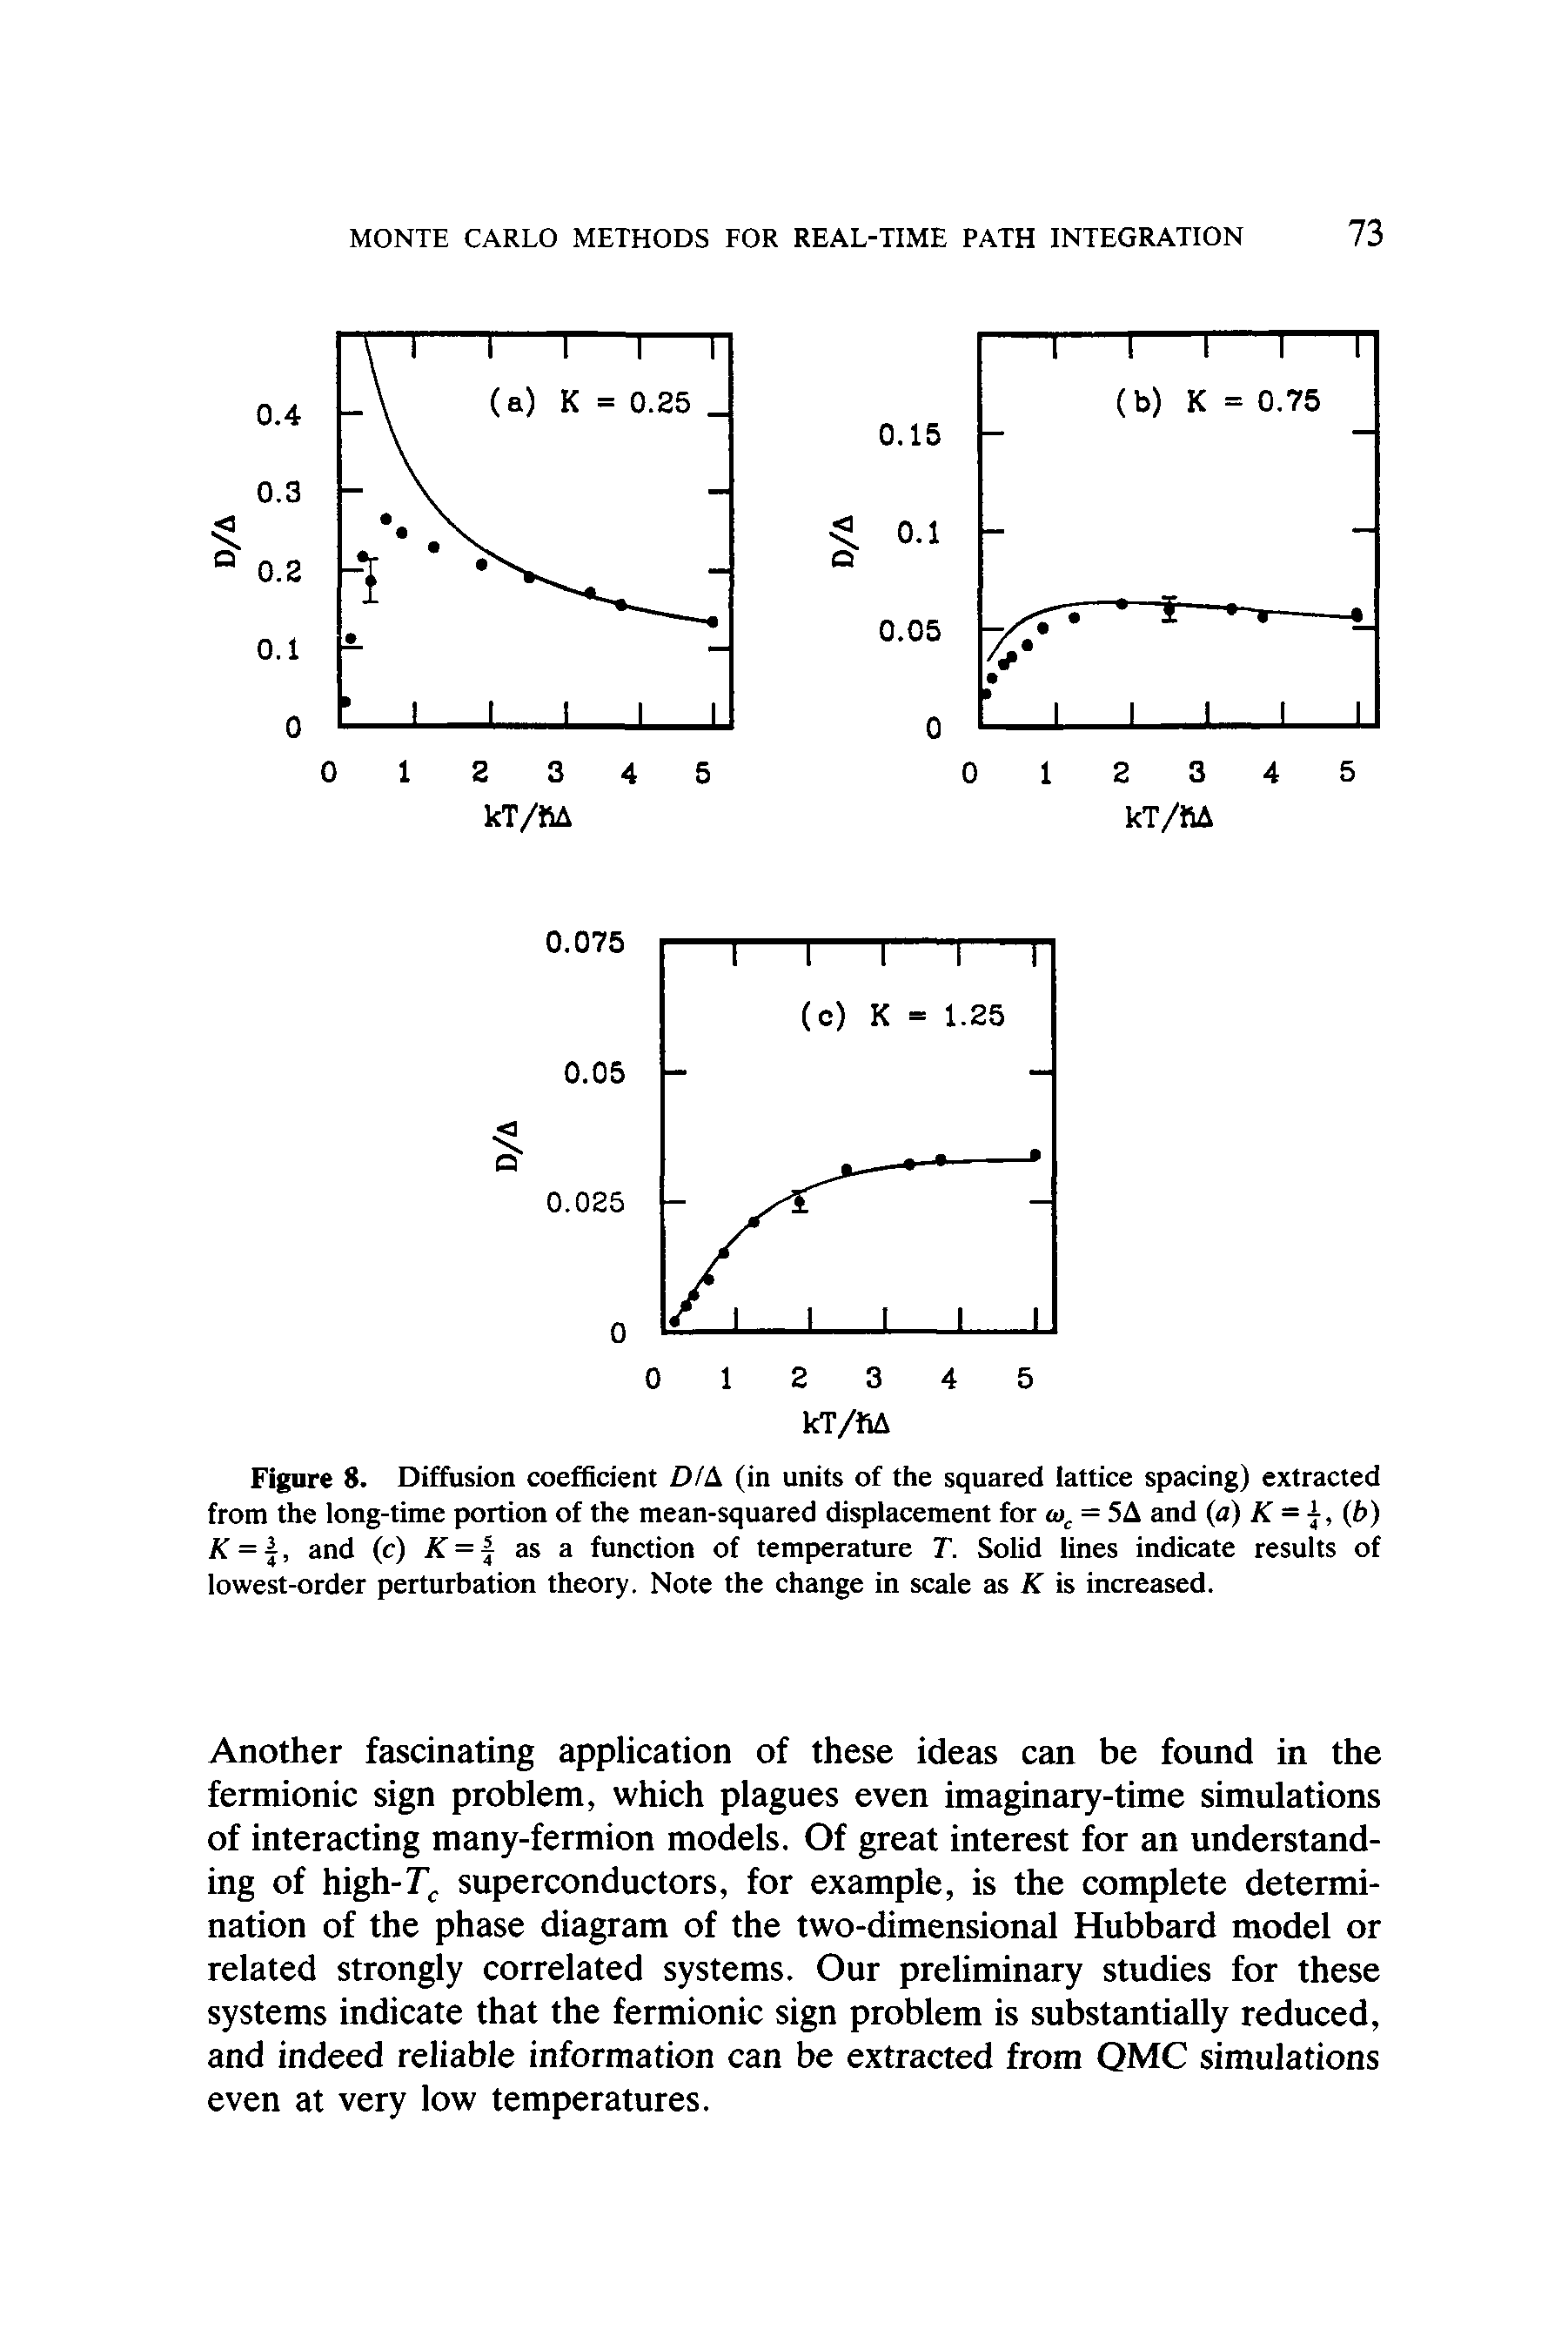 Figure 8. Diffusion coefficient D/A (in units of the squared lattice spacing) extracted from the long-time portion of the mean-squared displacement for = 5A and (a) K = j, (b) K =, and (c) K = as a function of temperature T. Solid lines indicate results of lowest-order perturbation theory. Note the change in scale as K is increased.